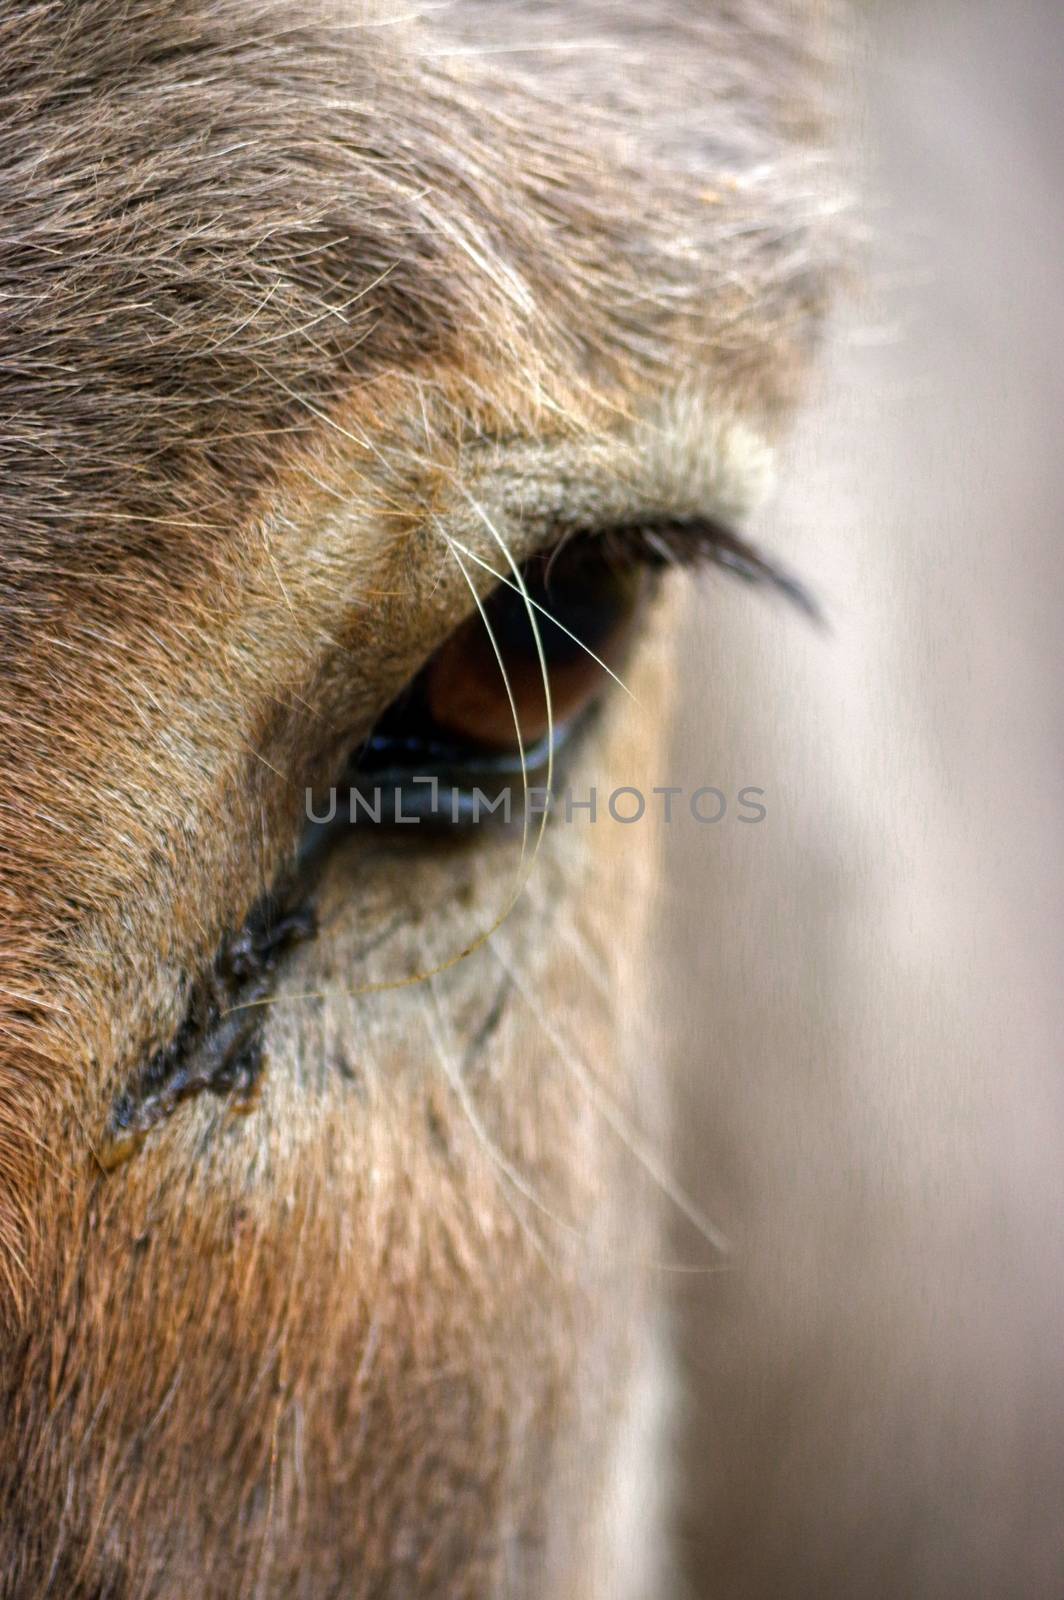 a close-up of donkey's head and eye